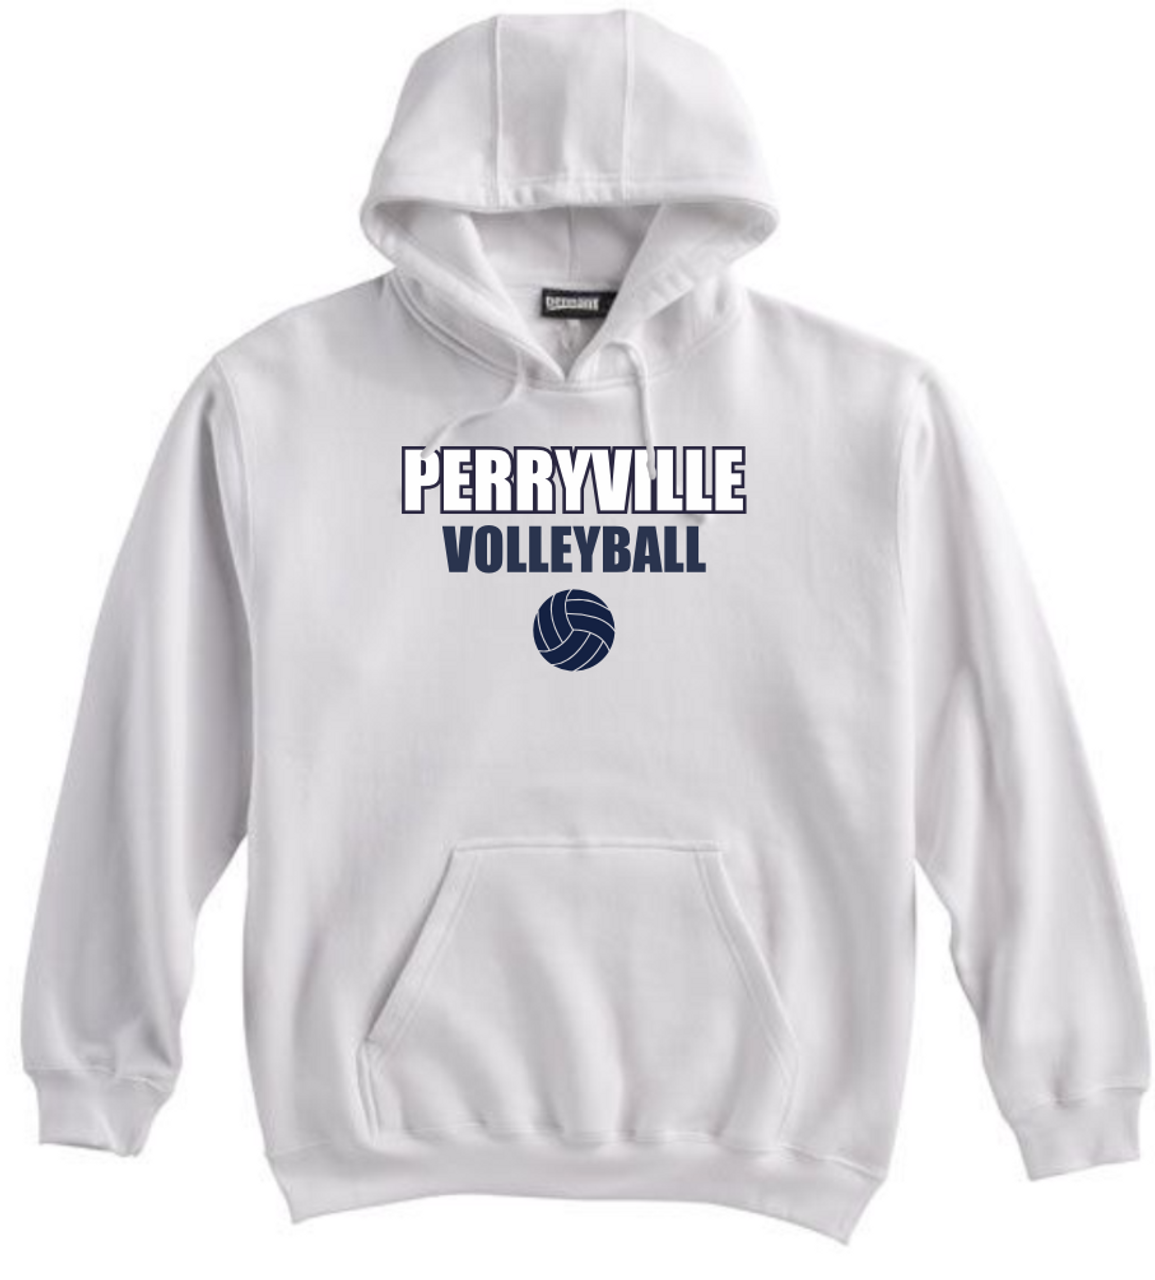 Perryville Volleyball Hooded Sweatshirt, White